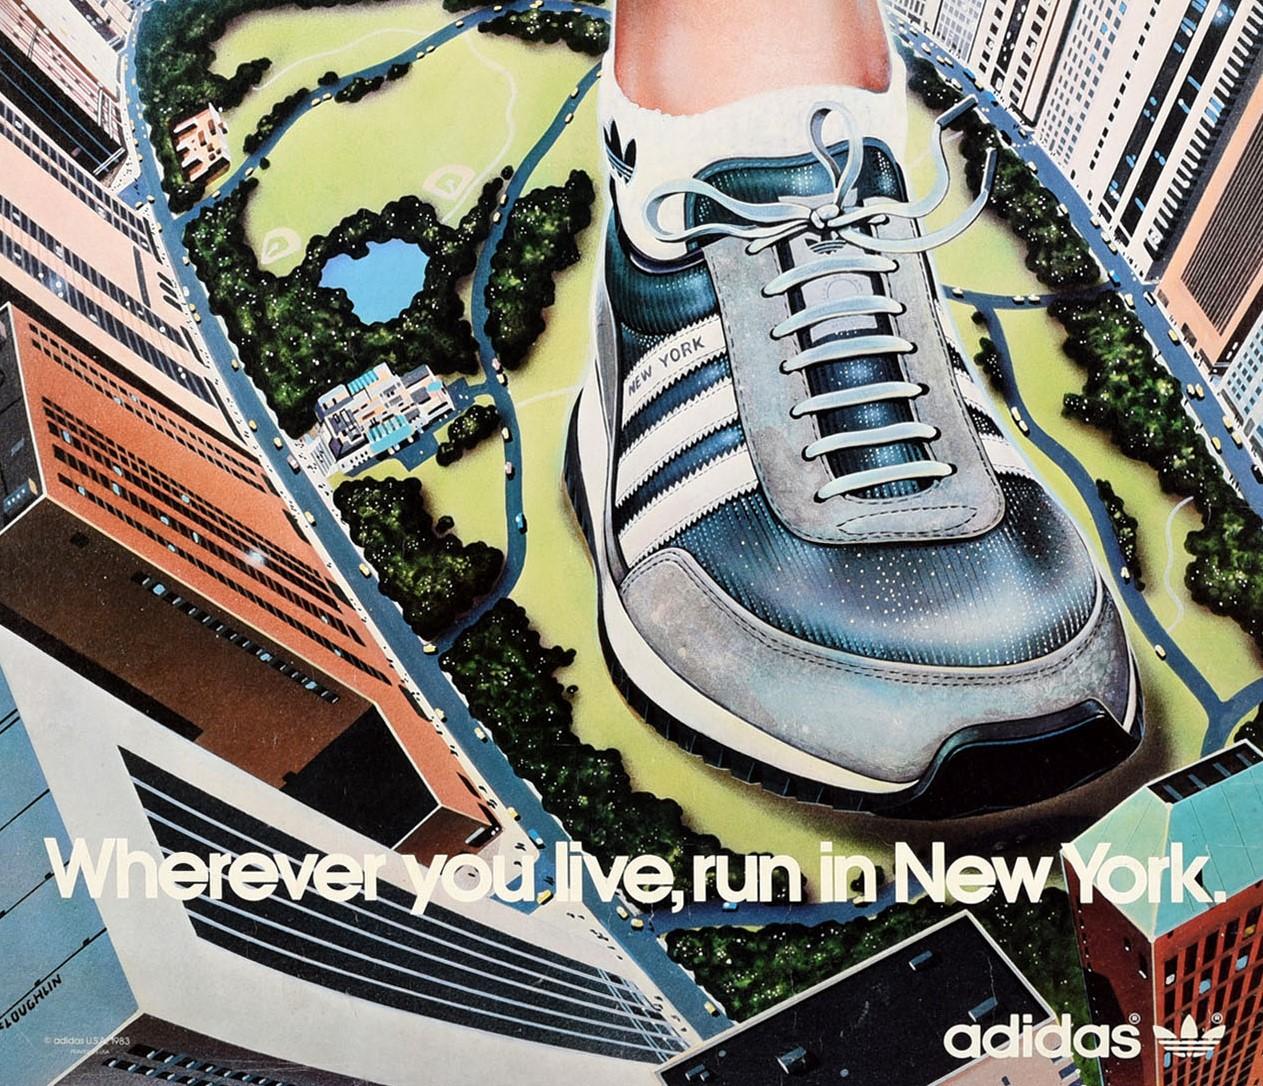 adidas you got this poster